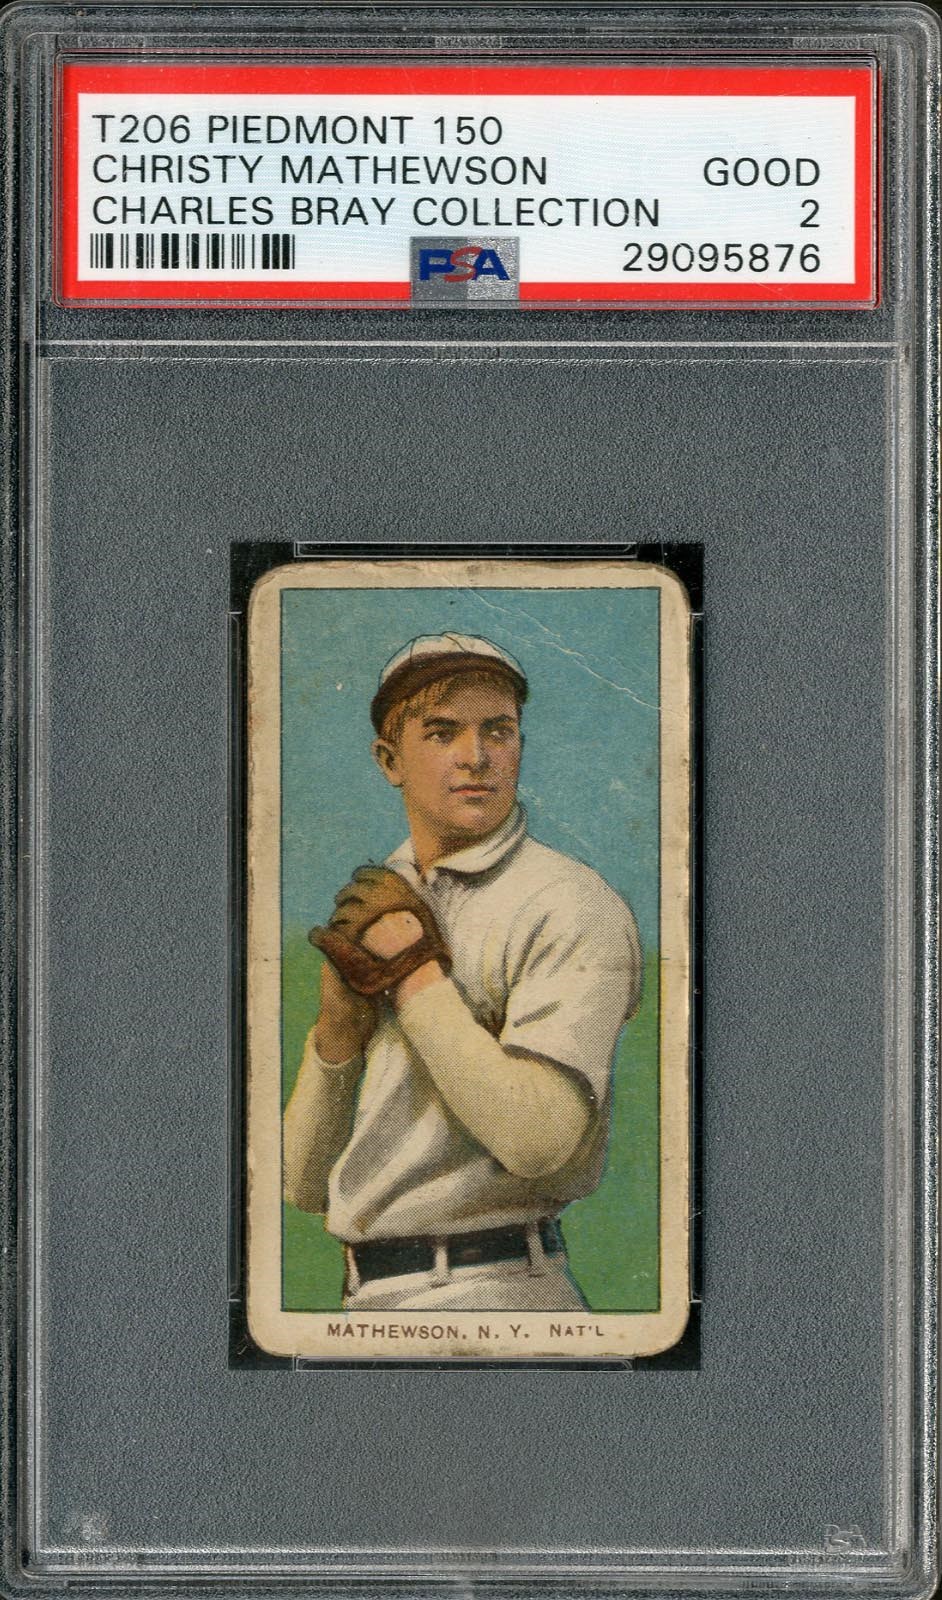 - T206 Piedmont 150 Christy Mathewson PSA 2 From The Charles Bray Collection